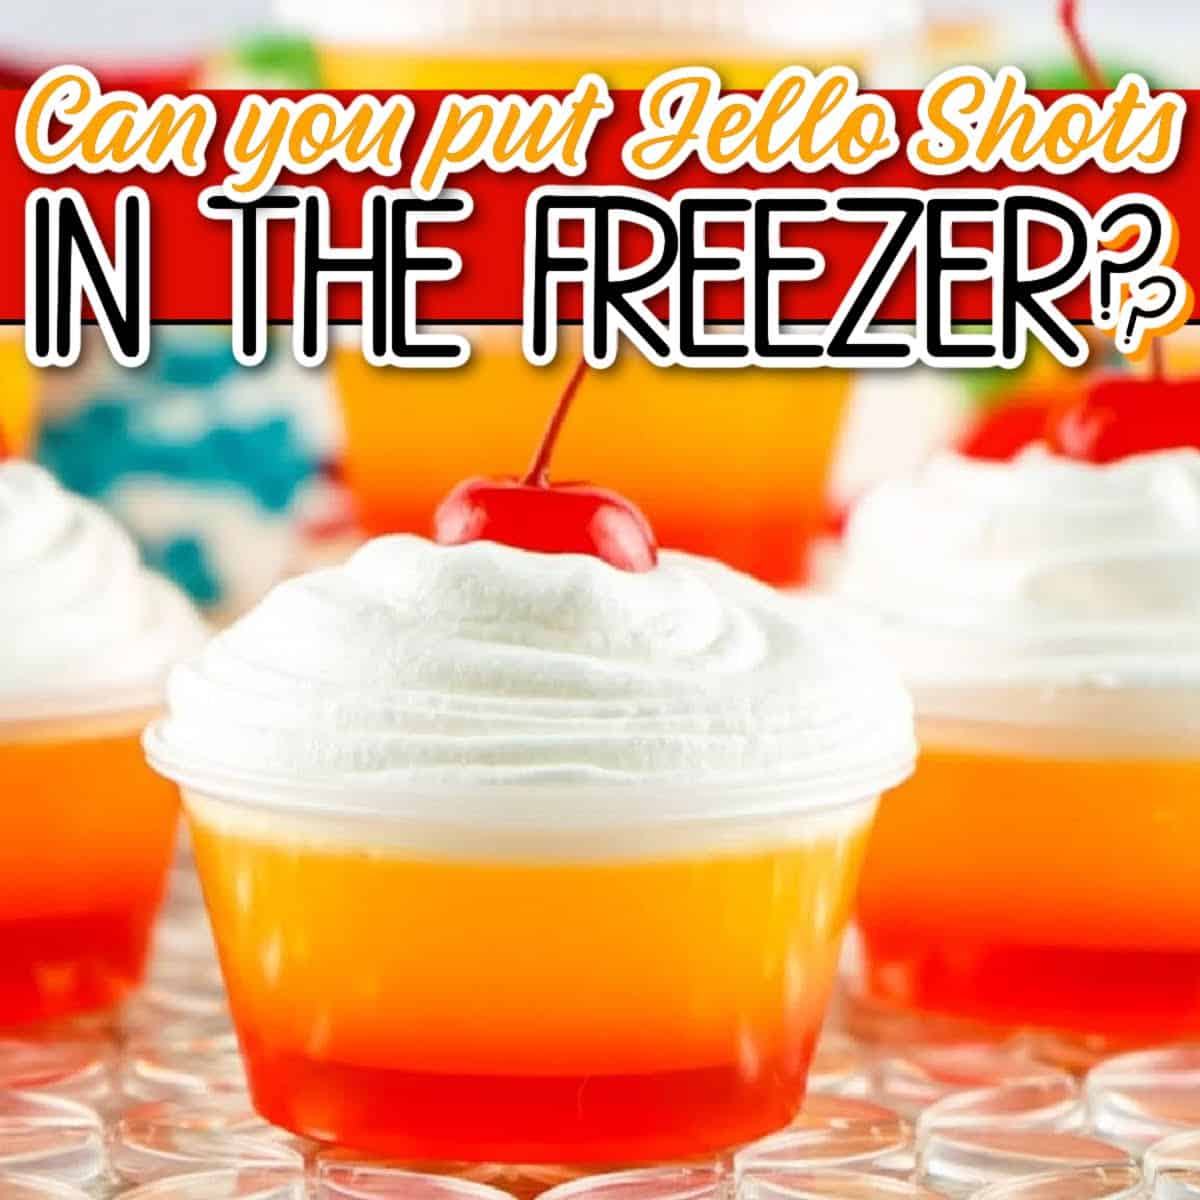 Closeup view of layered jello shots garnished with whipped cream and a cherry with "Can you put jello shots in the freezer" text overlay.